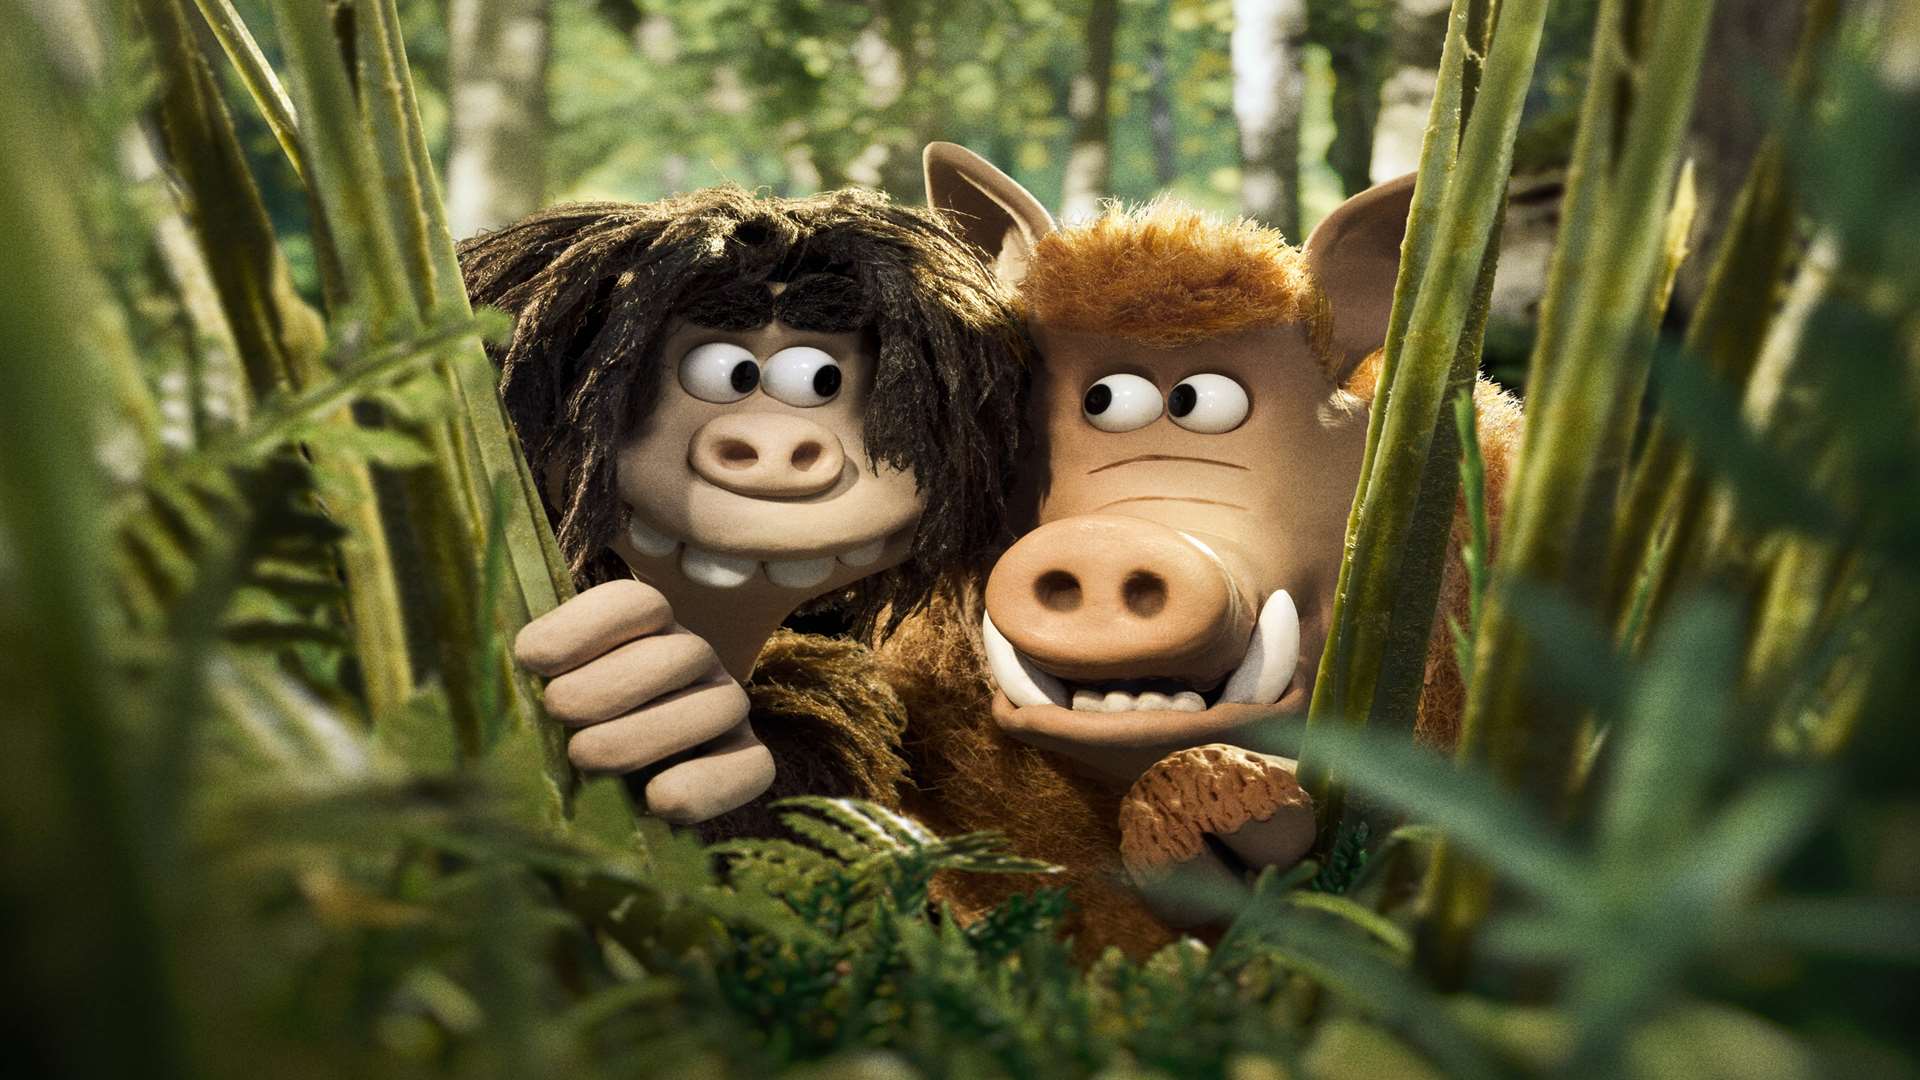 Plucky cave man named Dug and his sidekick Hognob face a grave threat to their simple existence in Early Man